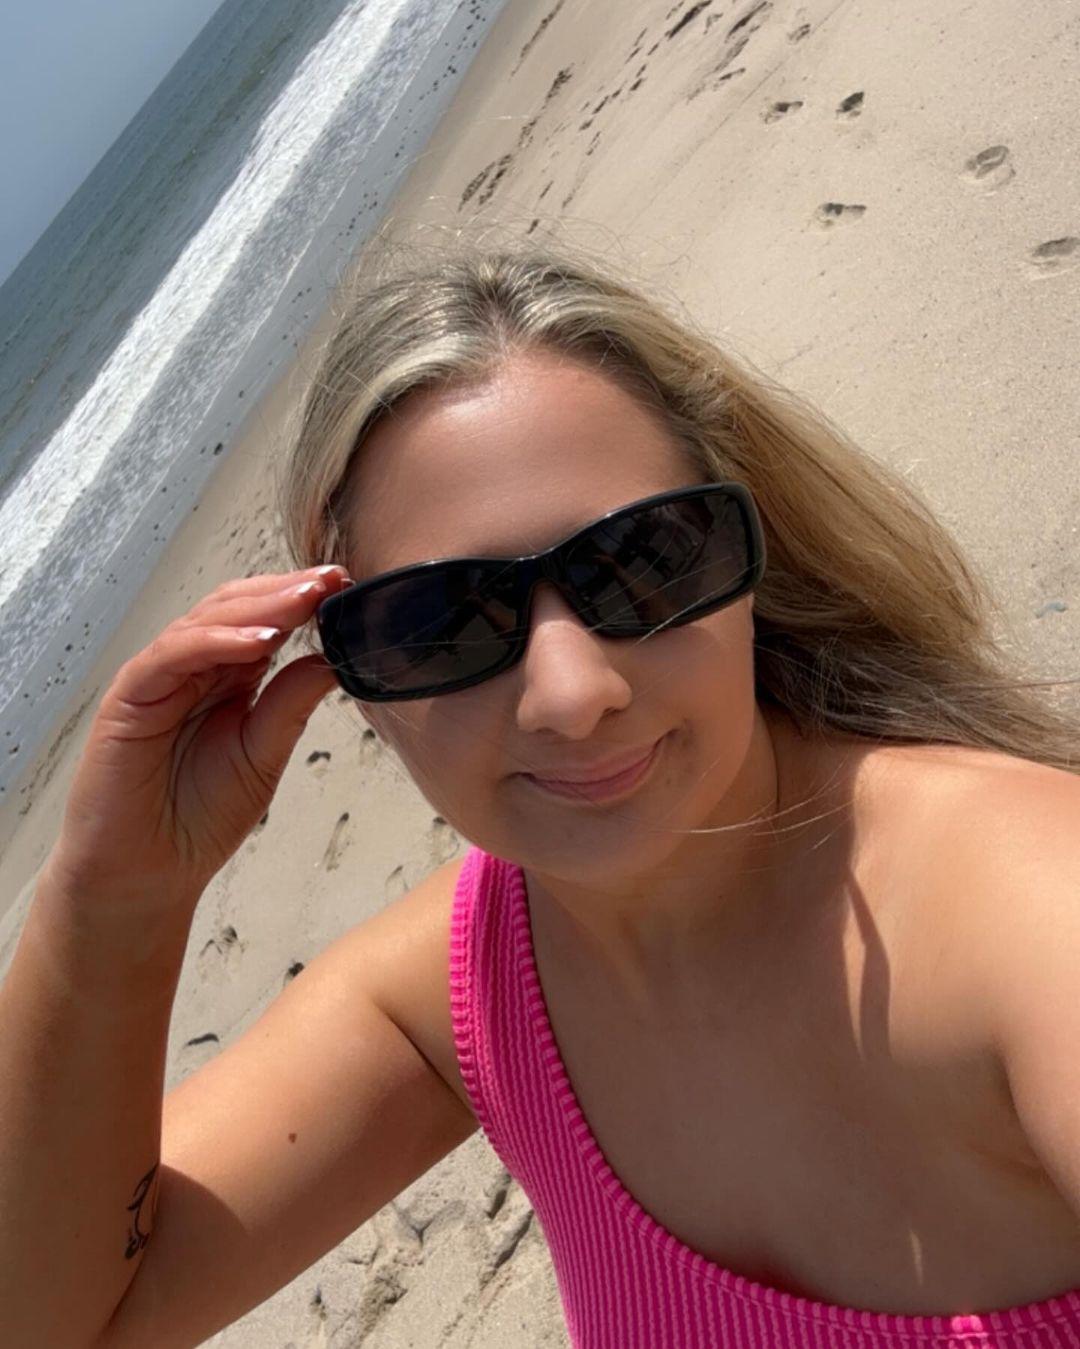 Gypsy Rose Blanchard takes a selfie at the beach